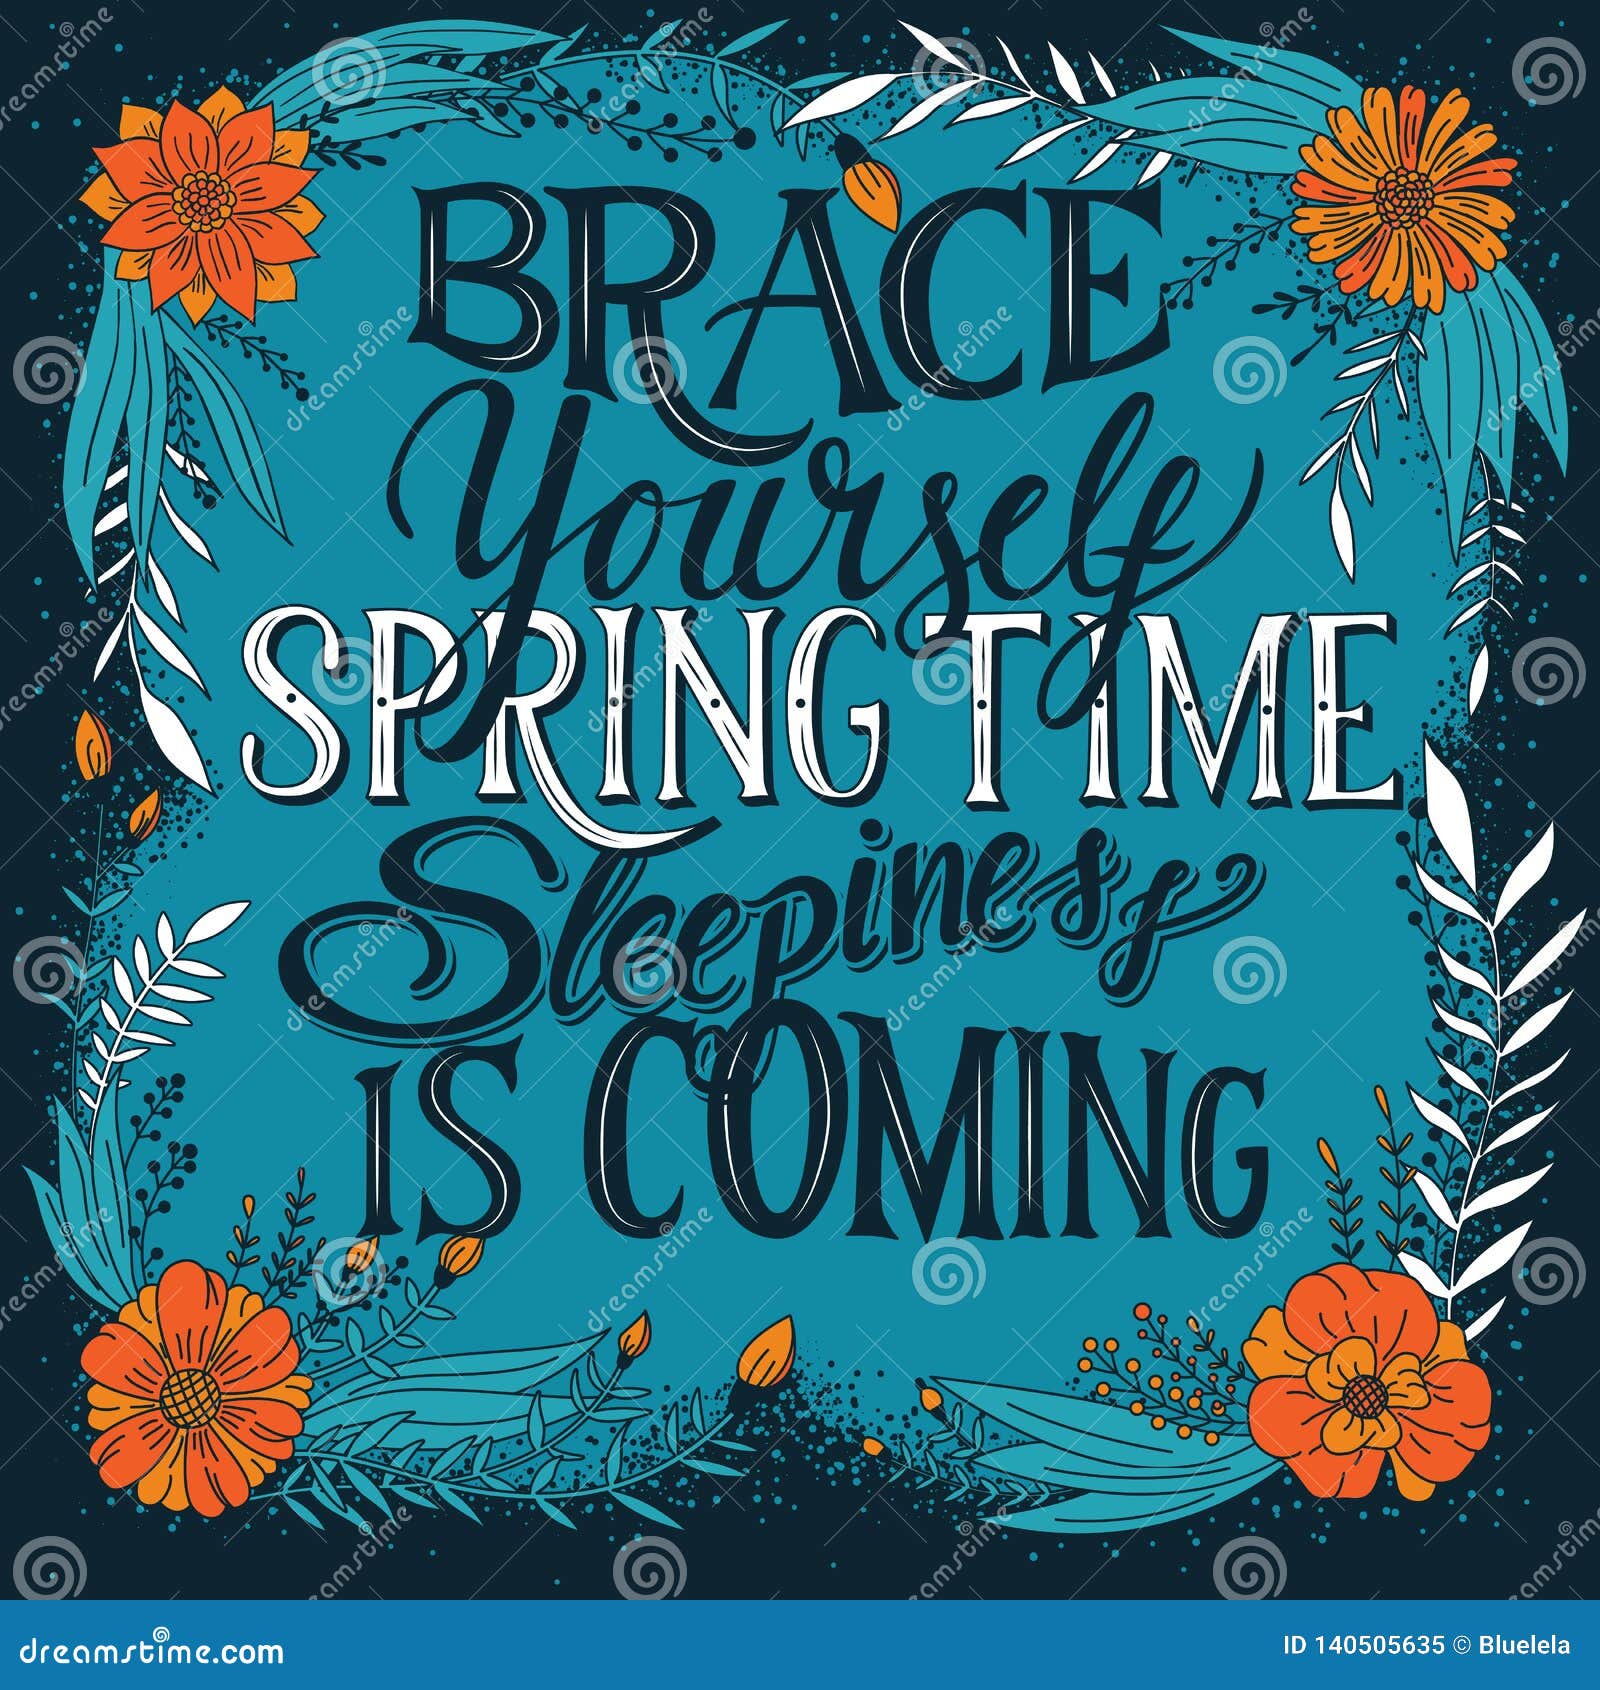 brace yourself spring time sleepiness is coming, hand lettering typography modern poster 